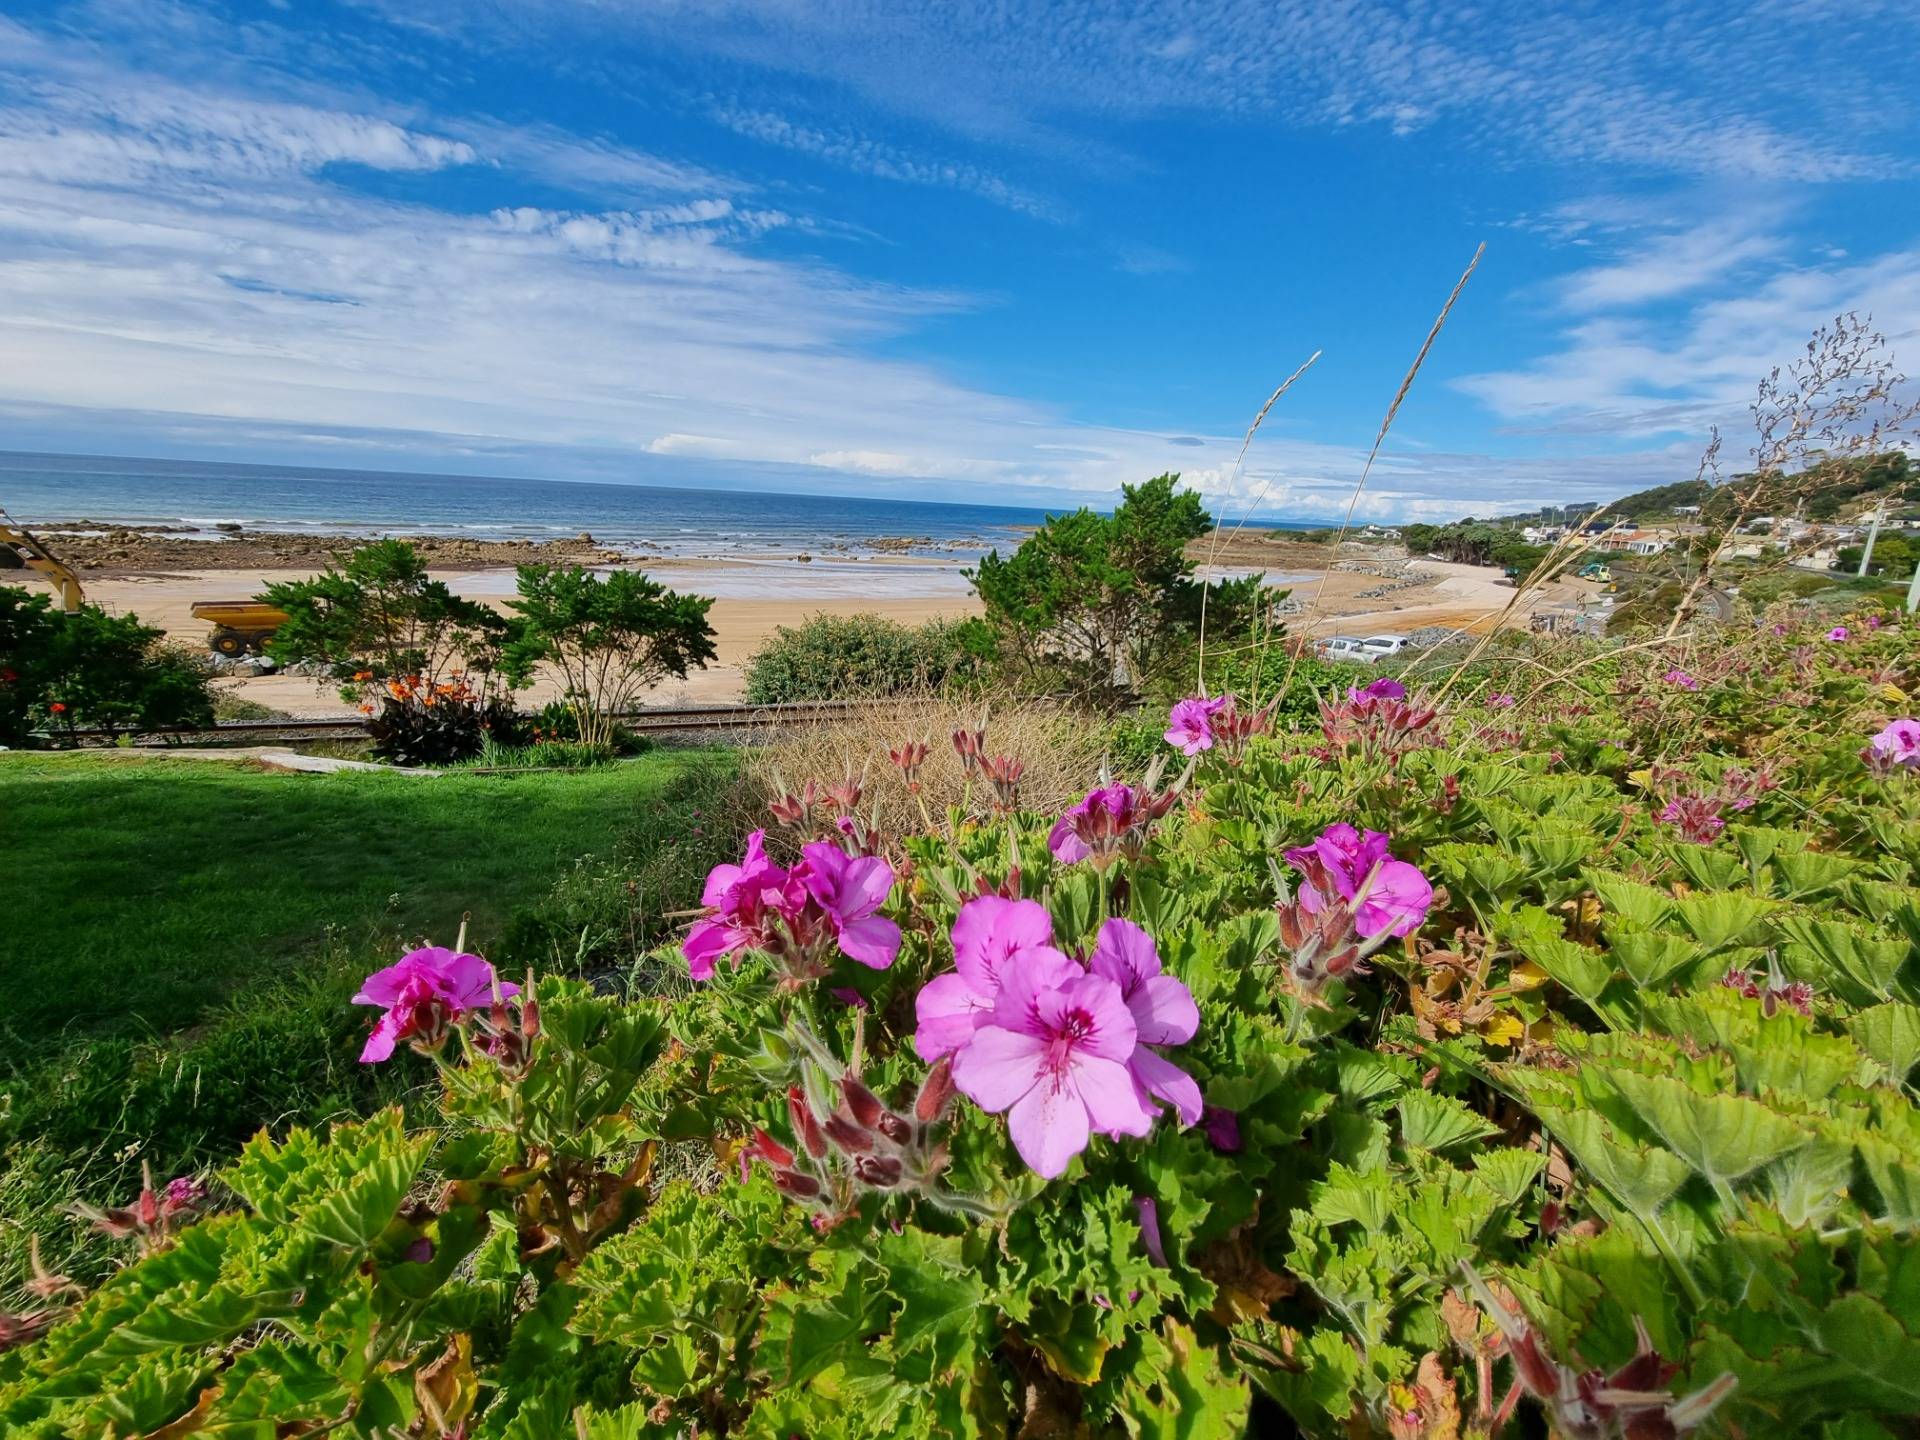 Blue skies, locals’ gardens and a view of one of the small beaches in town.